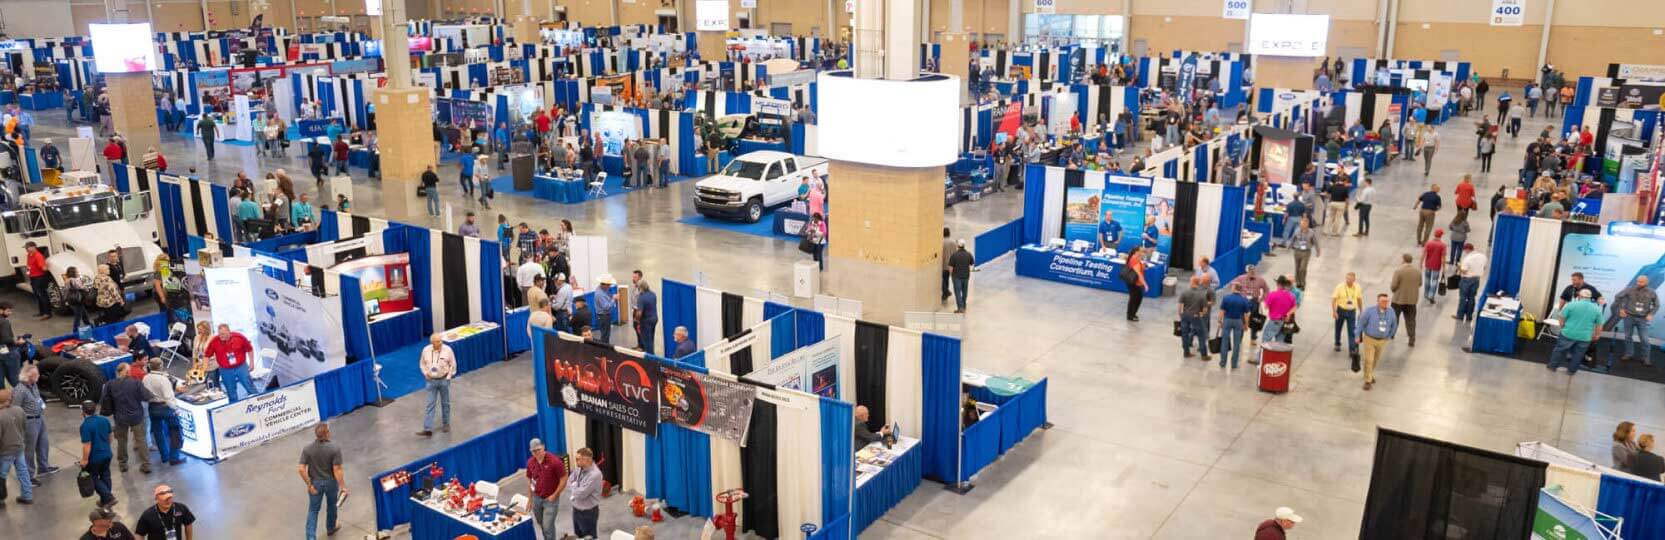 Overview of Expo exhibition space, showing booths and attendees